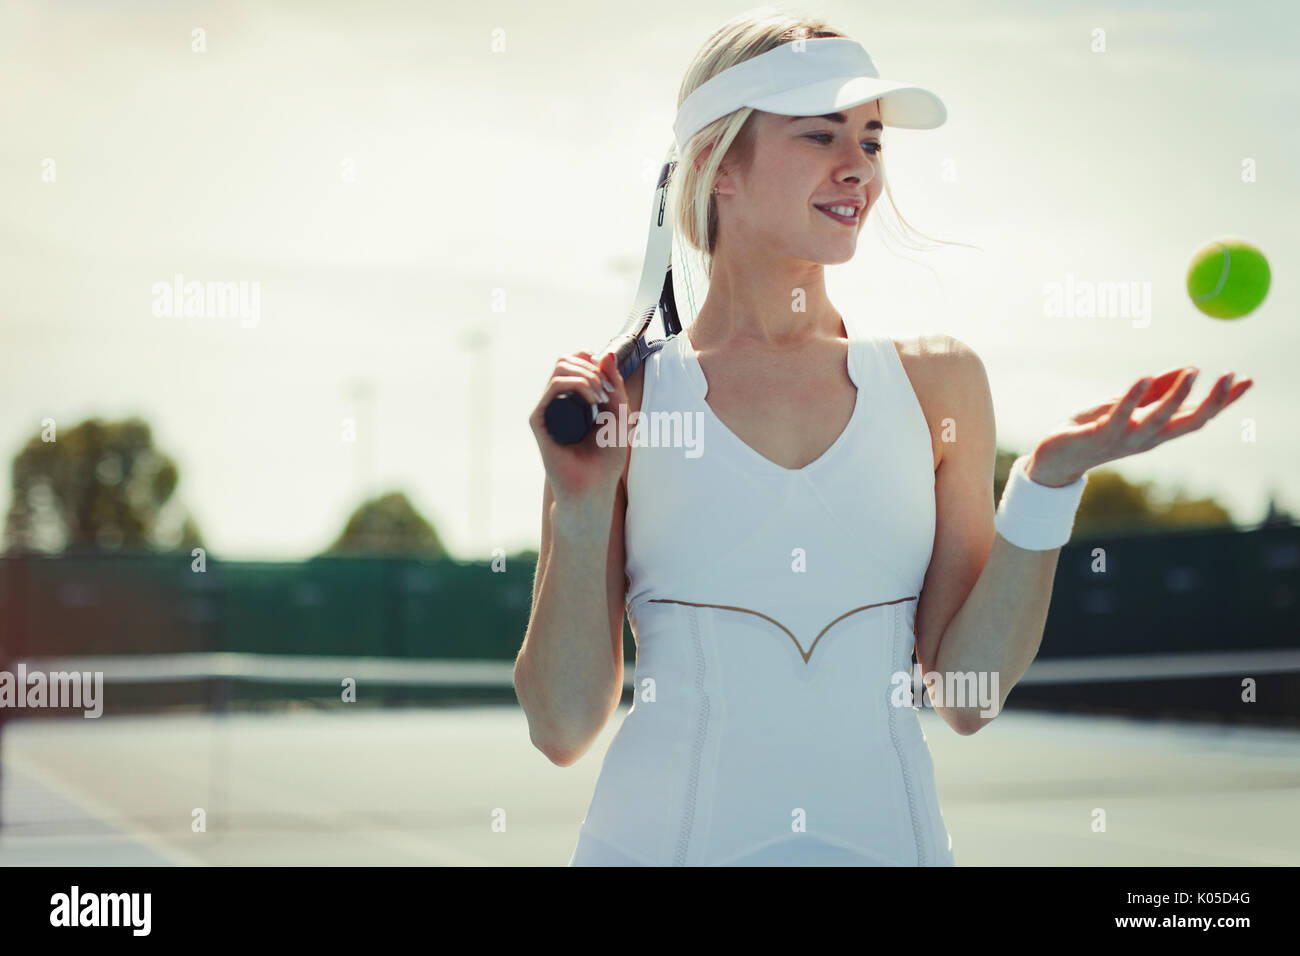 Smiling young female tennis player holding tennis racket and tennis ball on tennis court Stock Photo